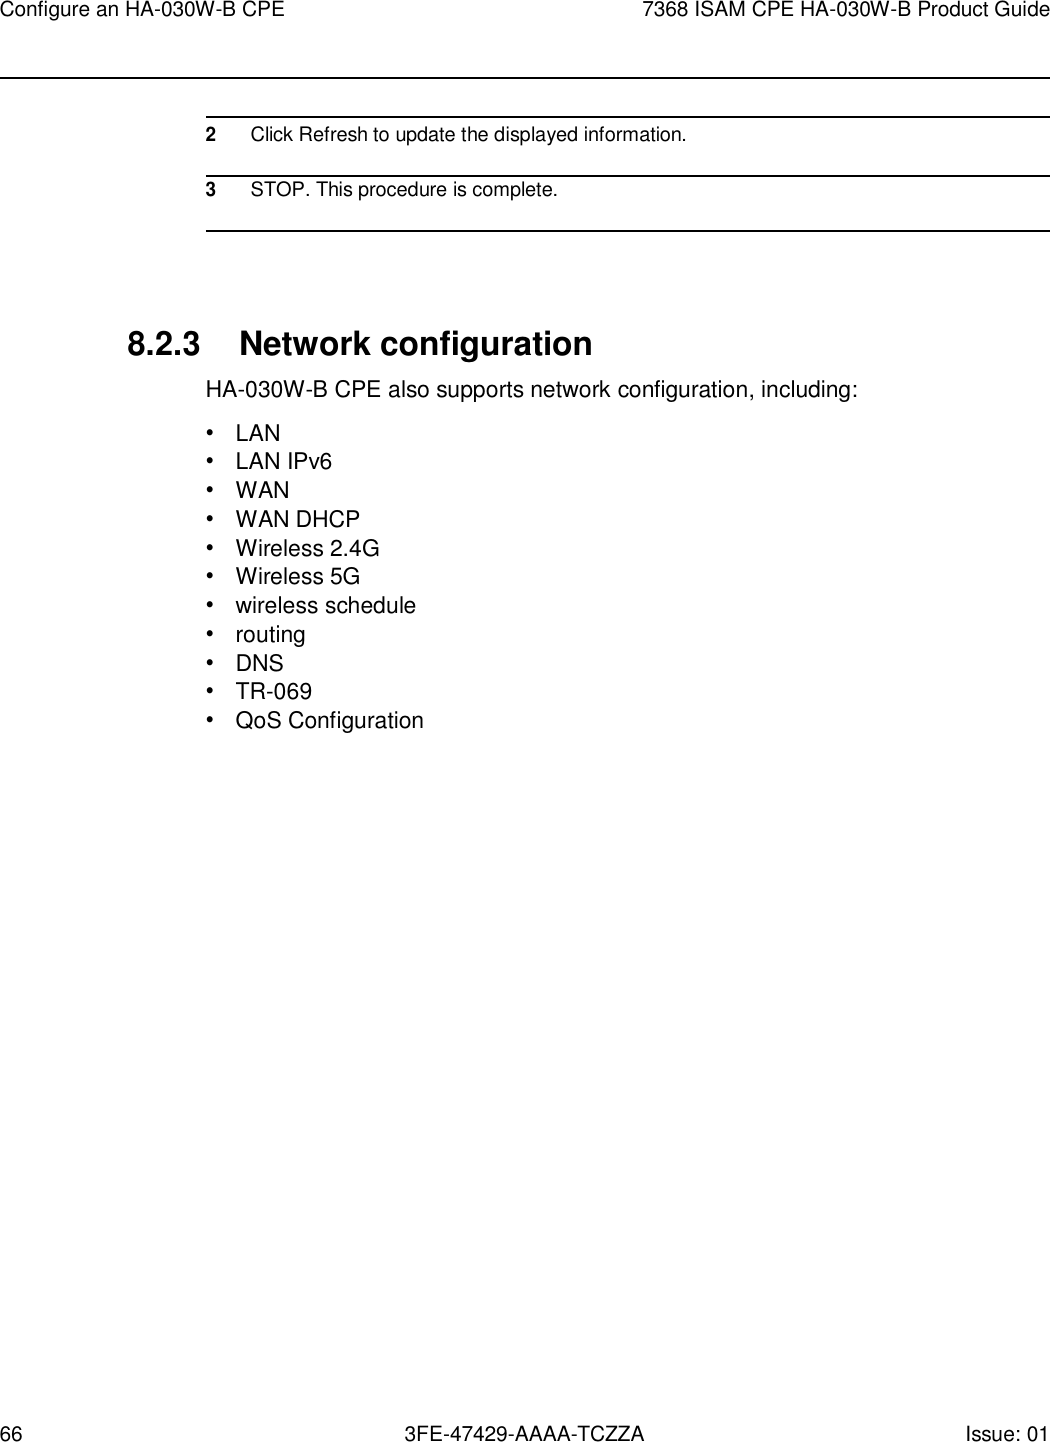 Page 66 of Nokia Bell HA030WB 7368 Intelligent Services Access Manager CPE User Manual 7368 ISAM CPE HA 020W A Product Guide